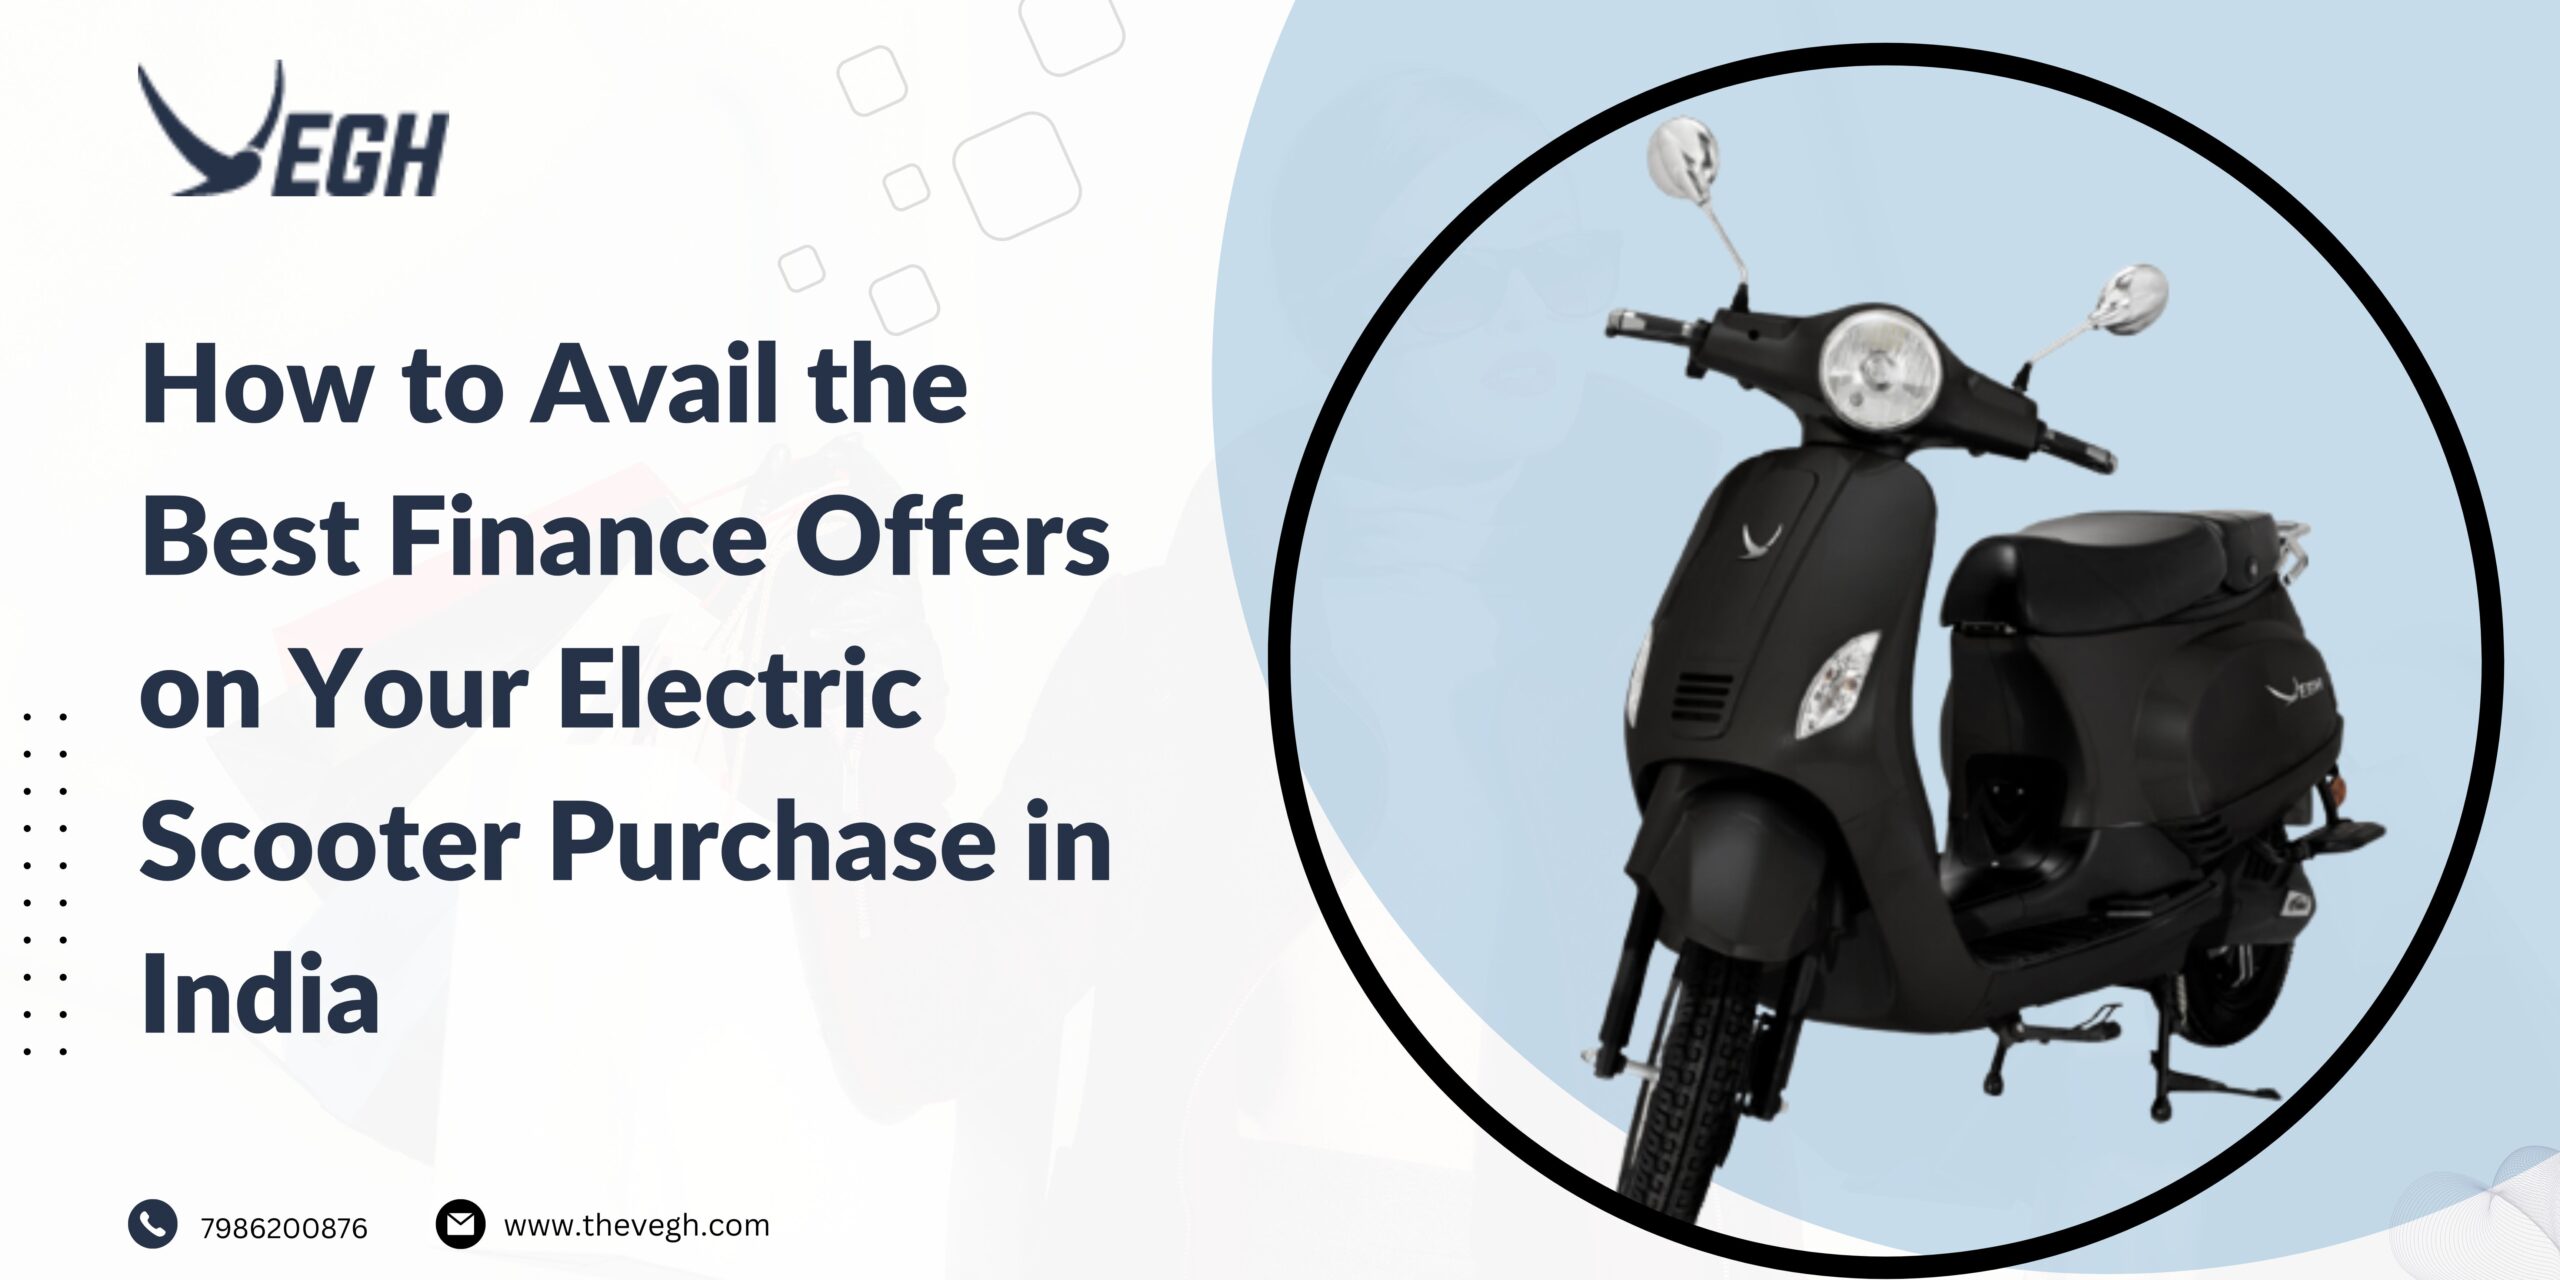 How to Avail the Best Finance Offers on Your Electric Scooter Purchase in India